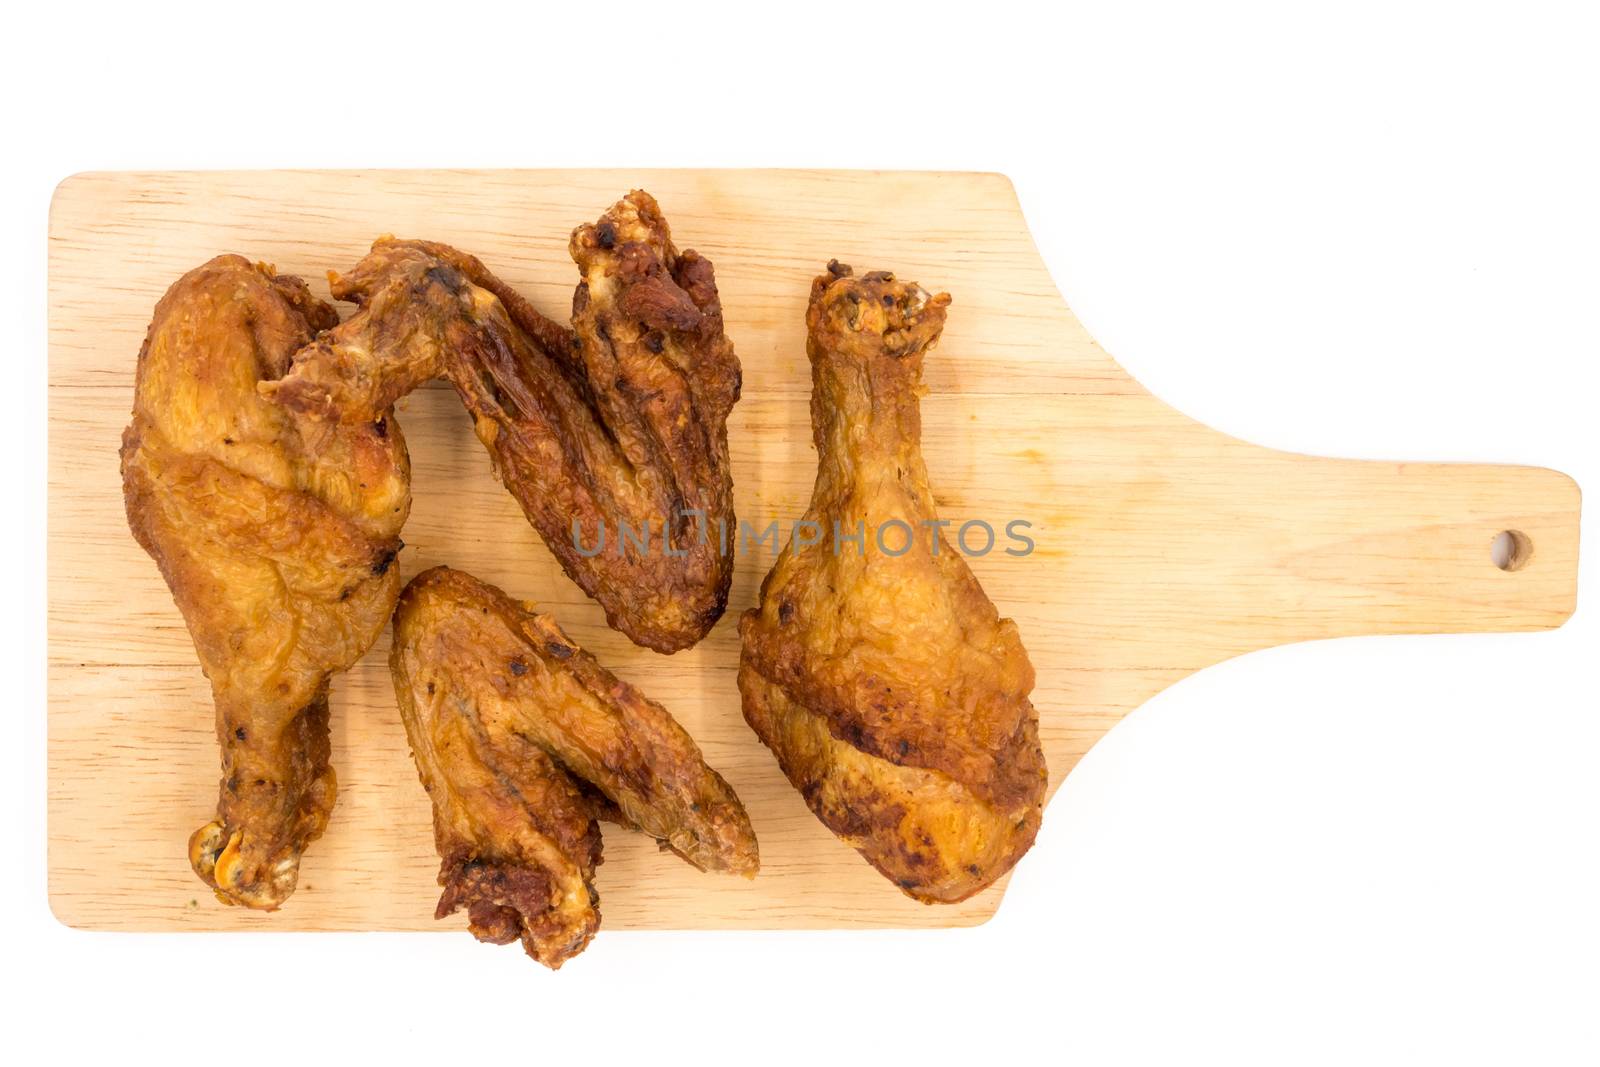 Fried chicken legs and wings on wooden tray over a white background by ronnarong